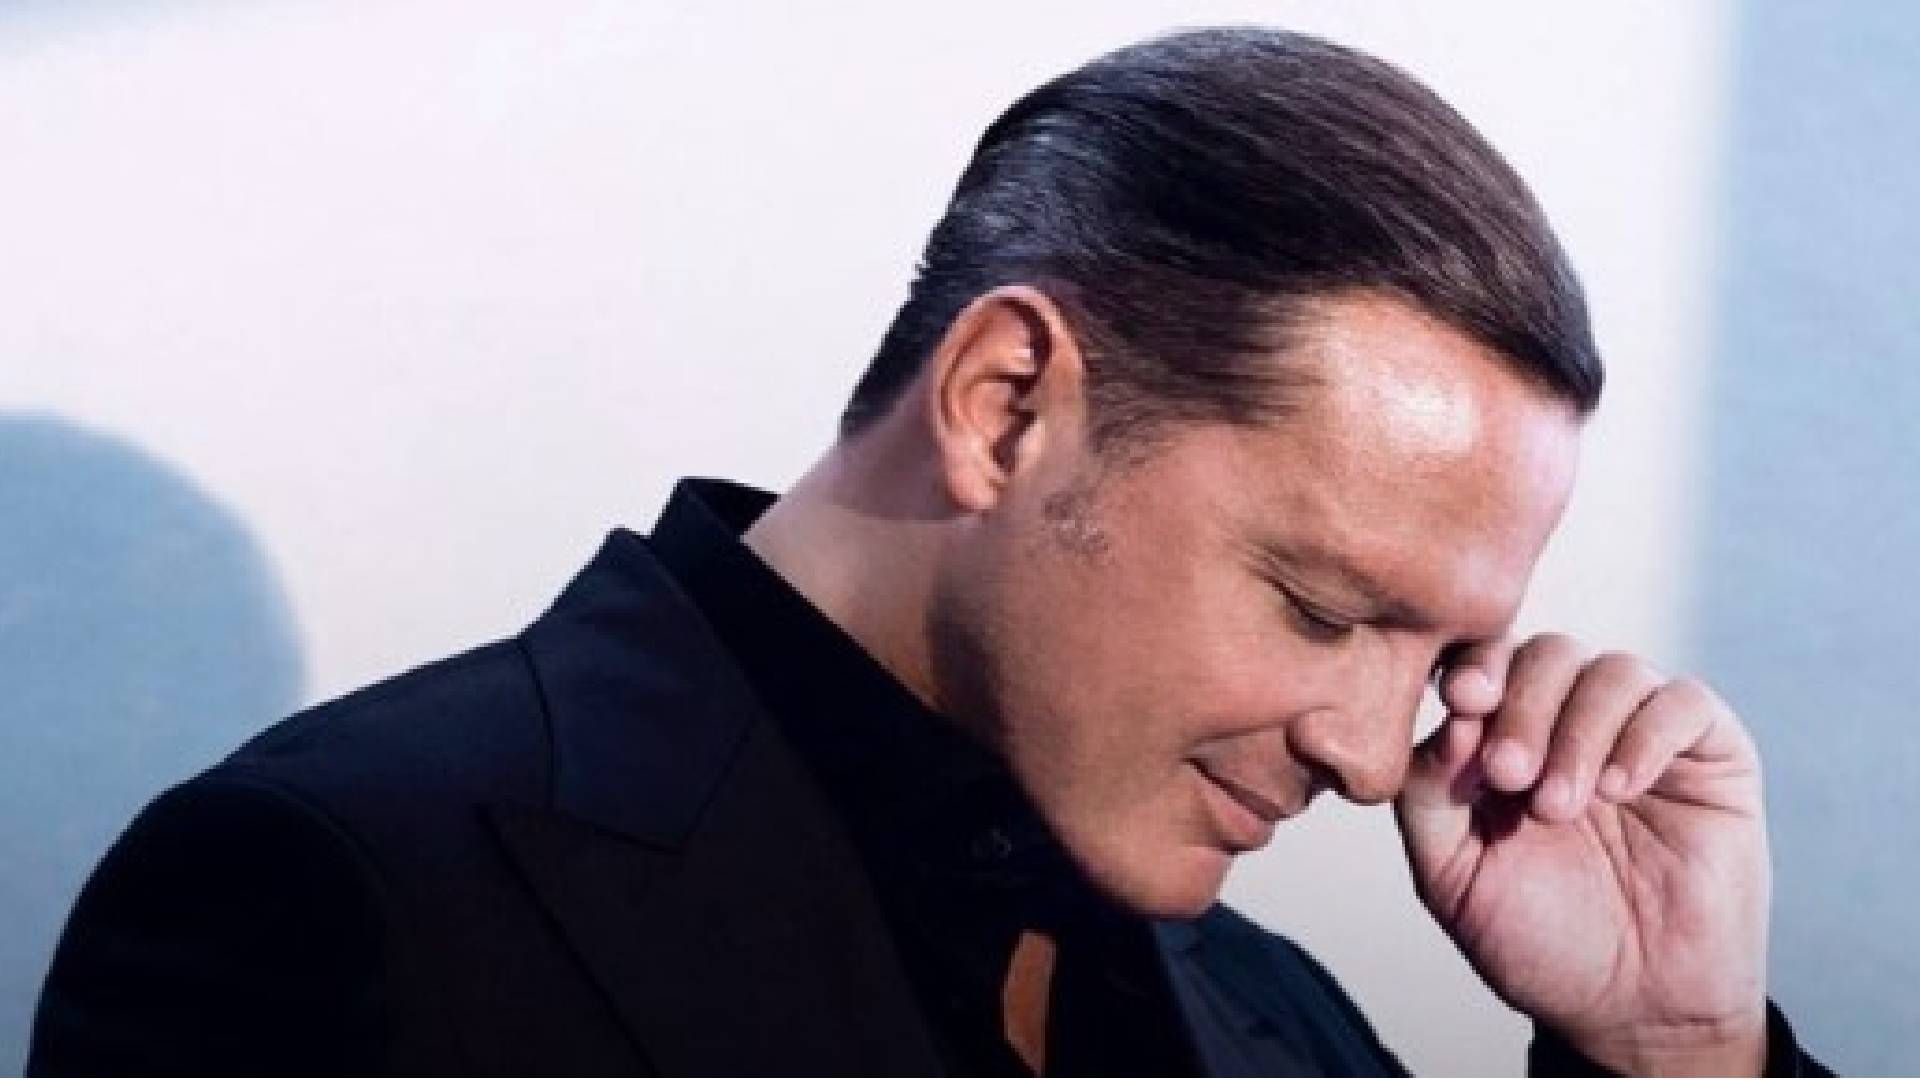 Luis Miguel is characterized by the things he asks for before his concerts since some requests are usually strange (Instagram/@luismiguel)